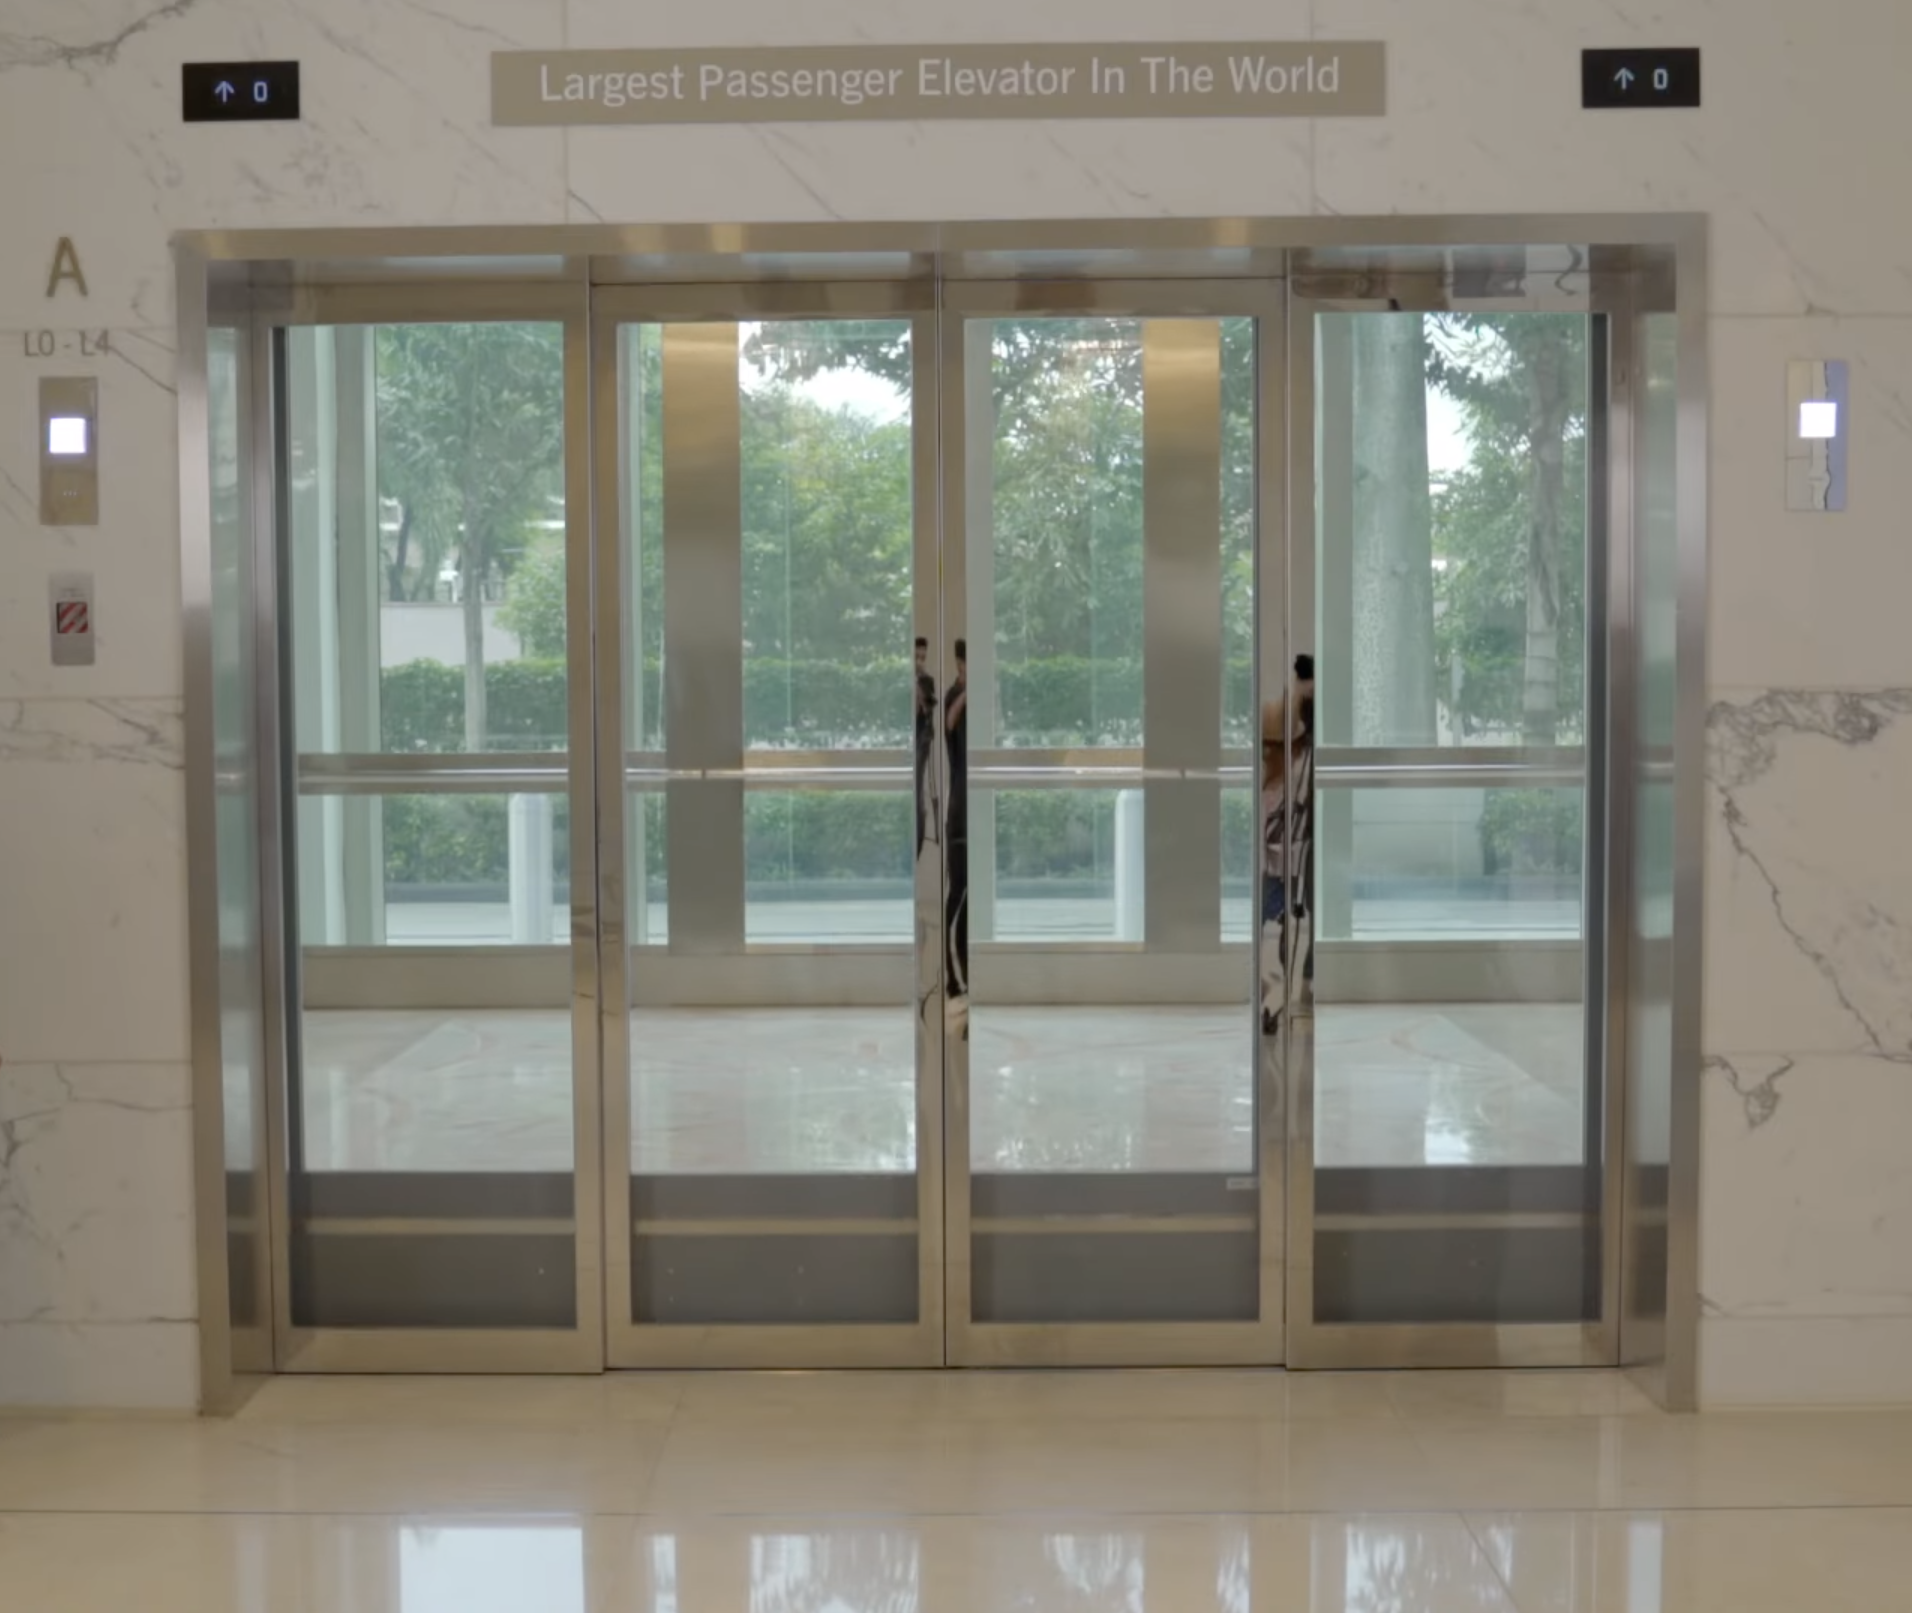 Largest passenger elevator in the world